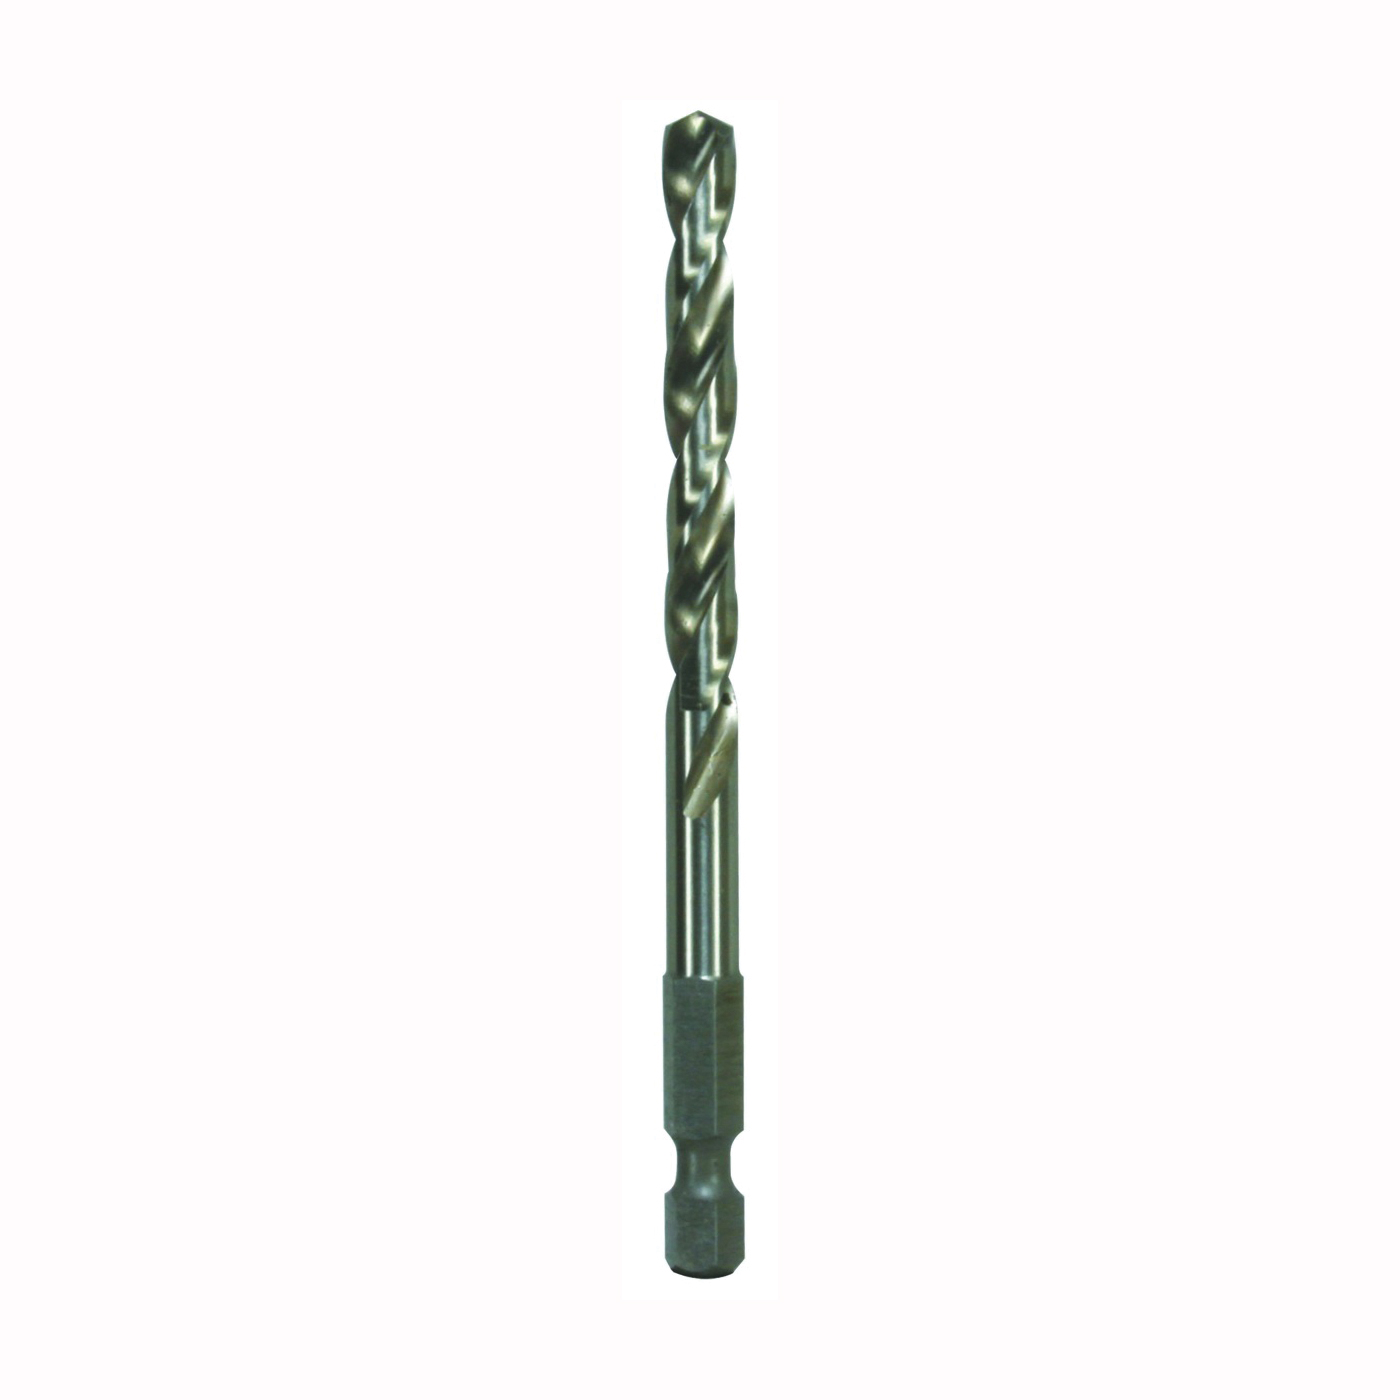 DHS4BITII Hole Saw Pilot Drill Bit, 1/4 in Shank, Hex Shank